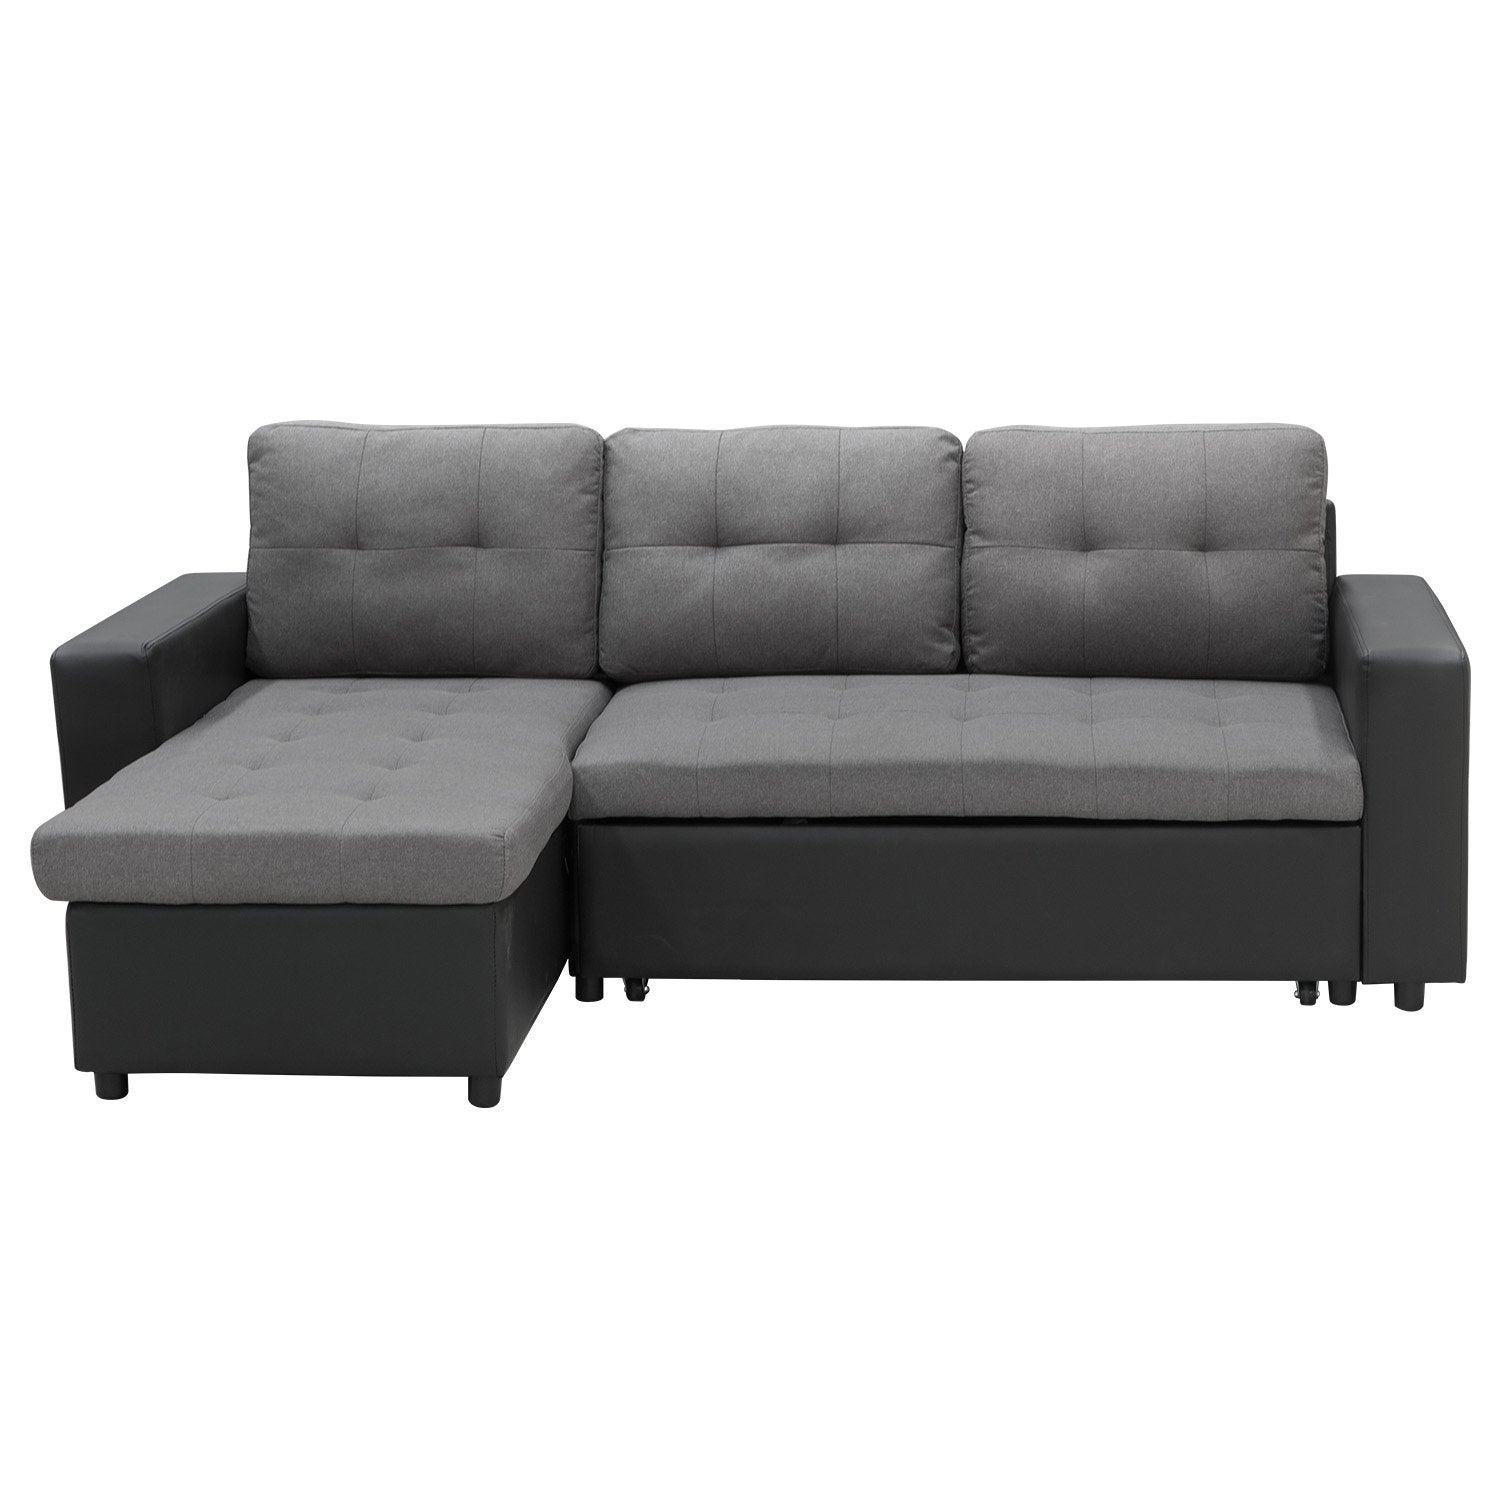 Sarantino 3-Seater Corner Sofa Bed With Storage Lounge Chaise Linen Couch - Black Grey